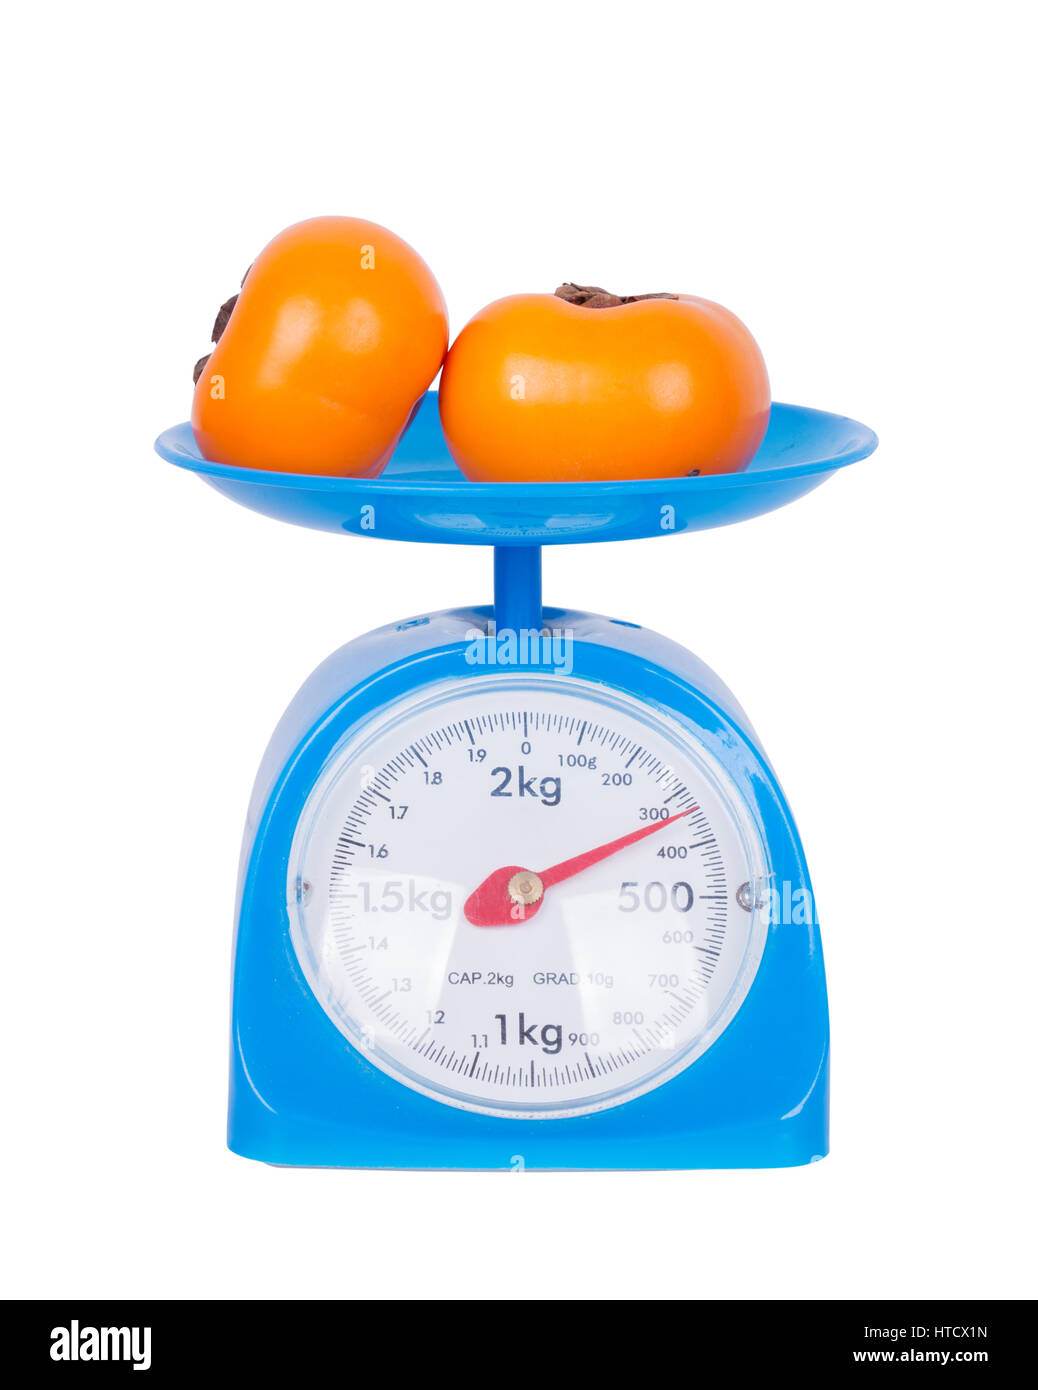 Fruits on weighing scale Cut Out Stock Images & Pictures - Alamy